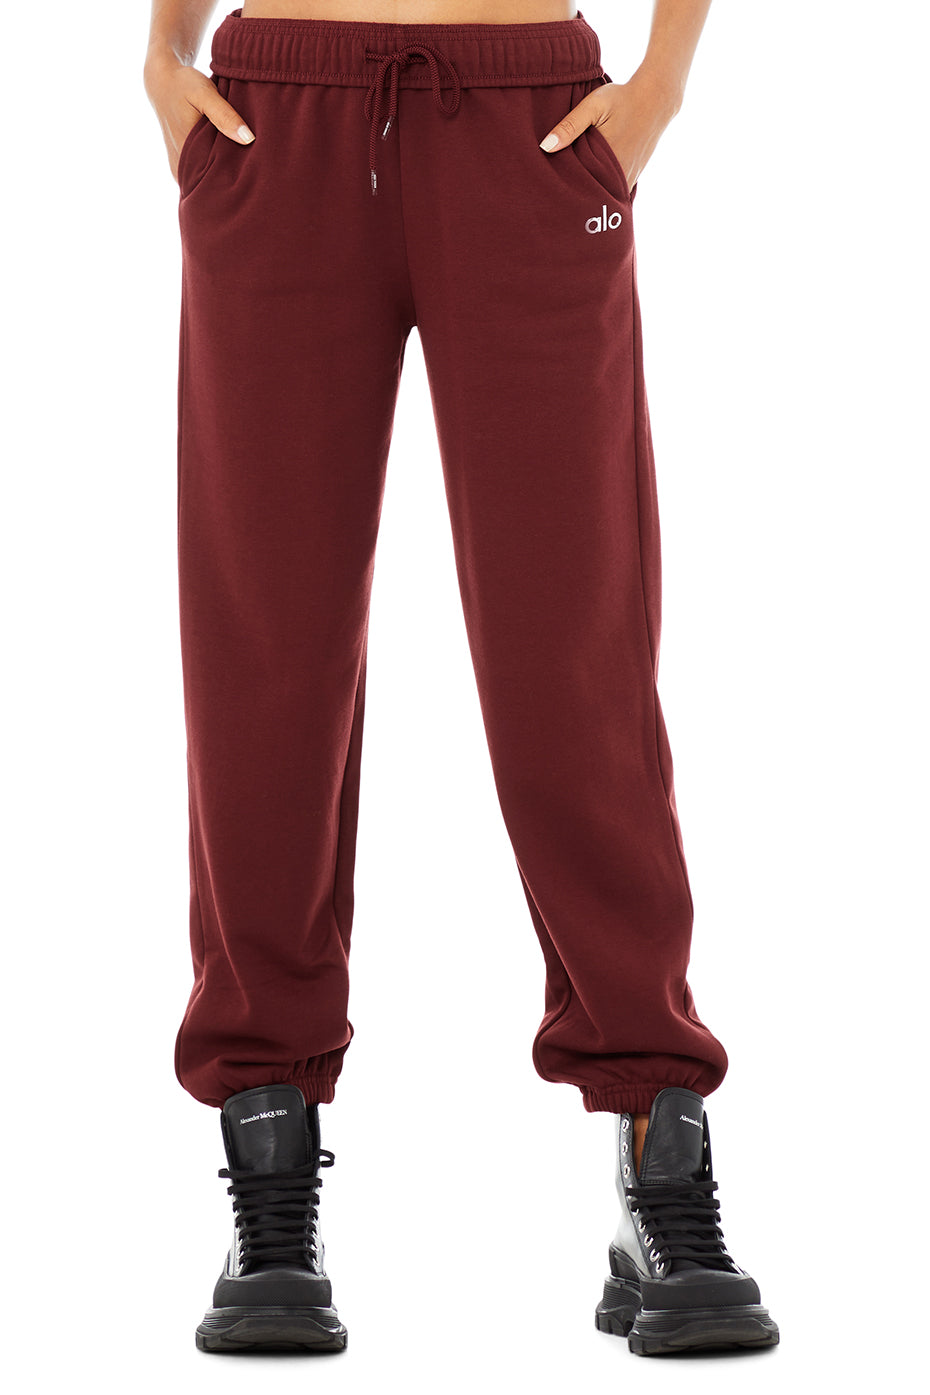 Alo yoga accolade sweatpants in cranberry burgundy. Worn 1 time